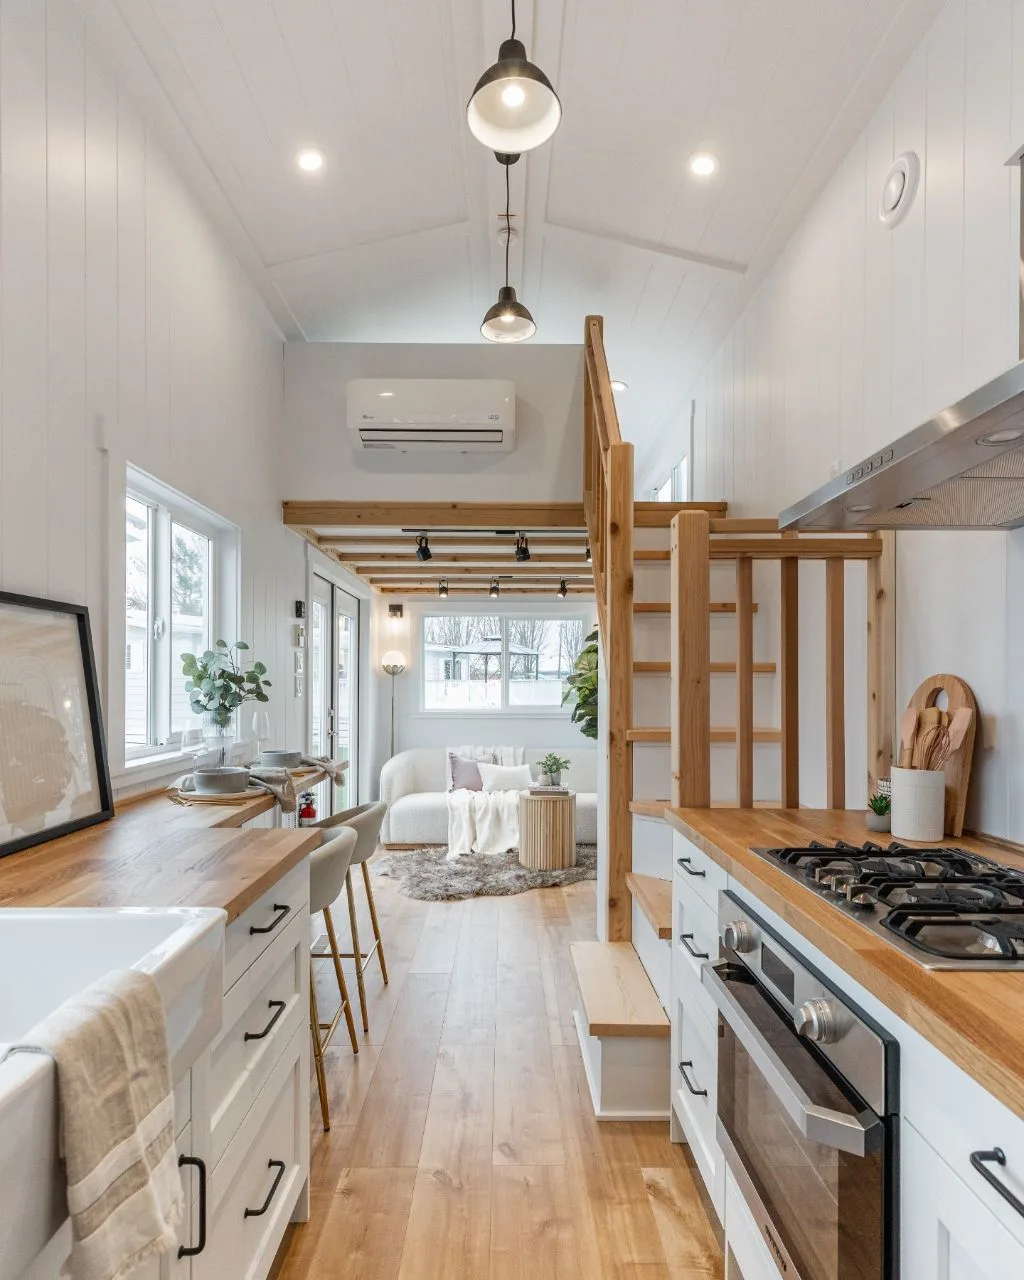 Kitchen & Living Room - Canada Goose Arctic Edition by Mint Tiny House Company